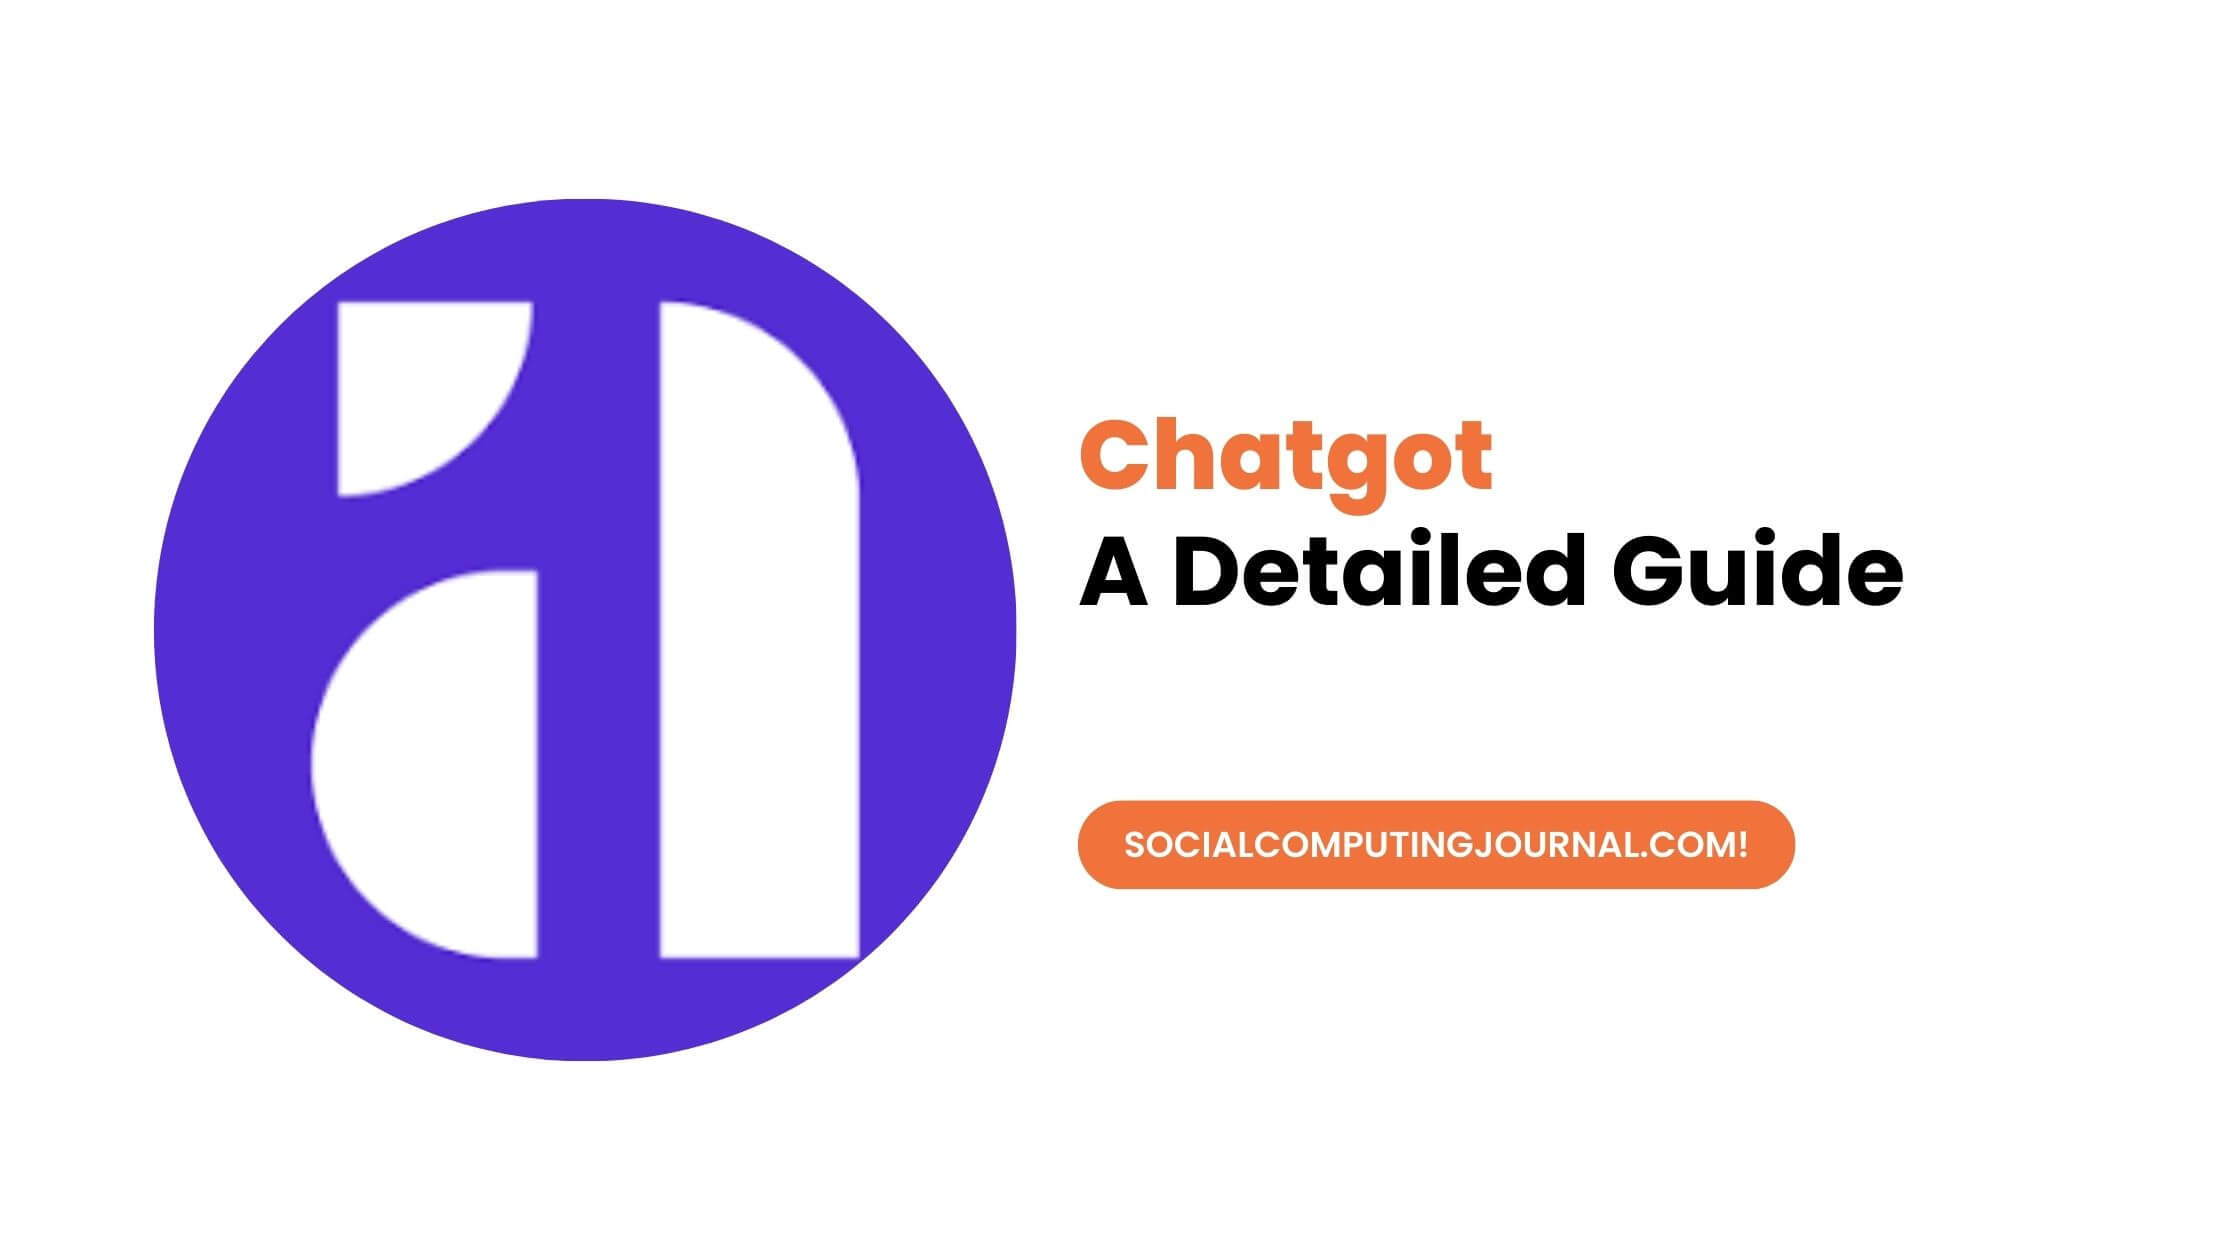 Chatgot - a detailed guide